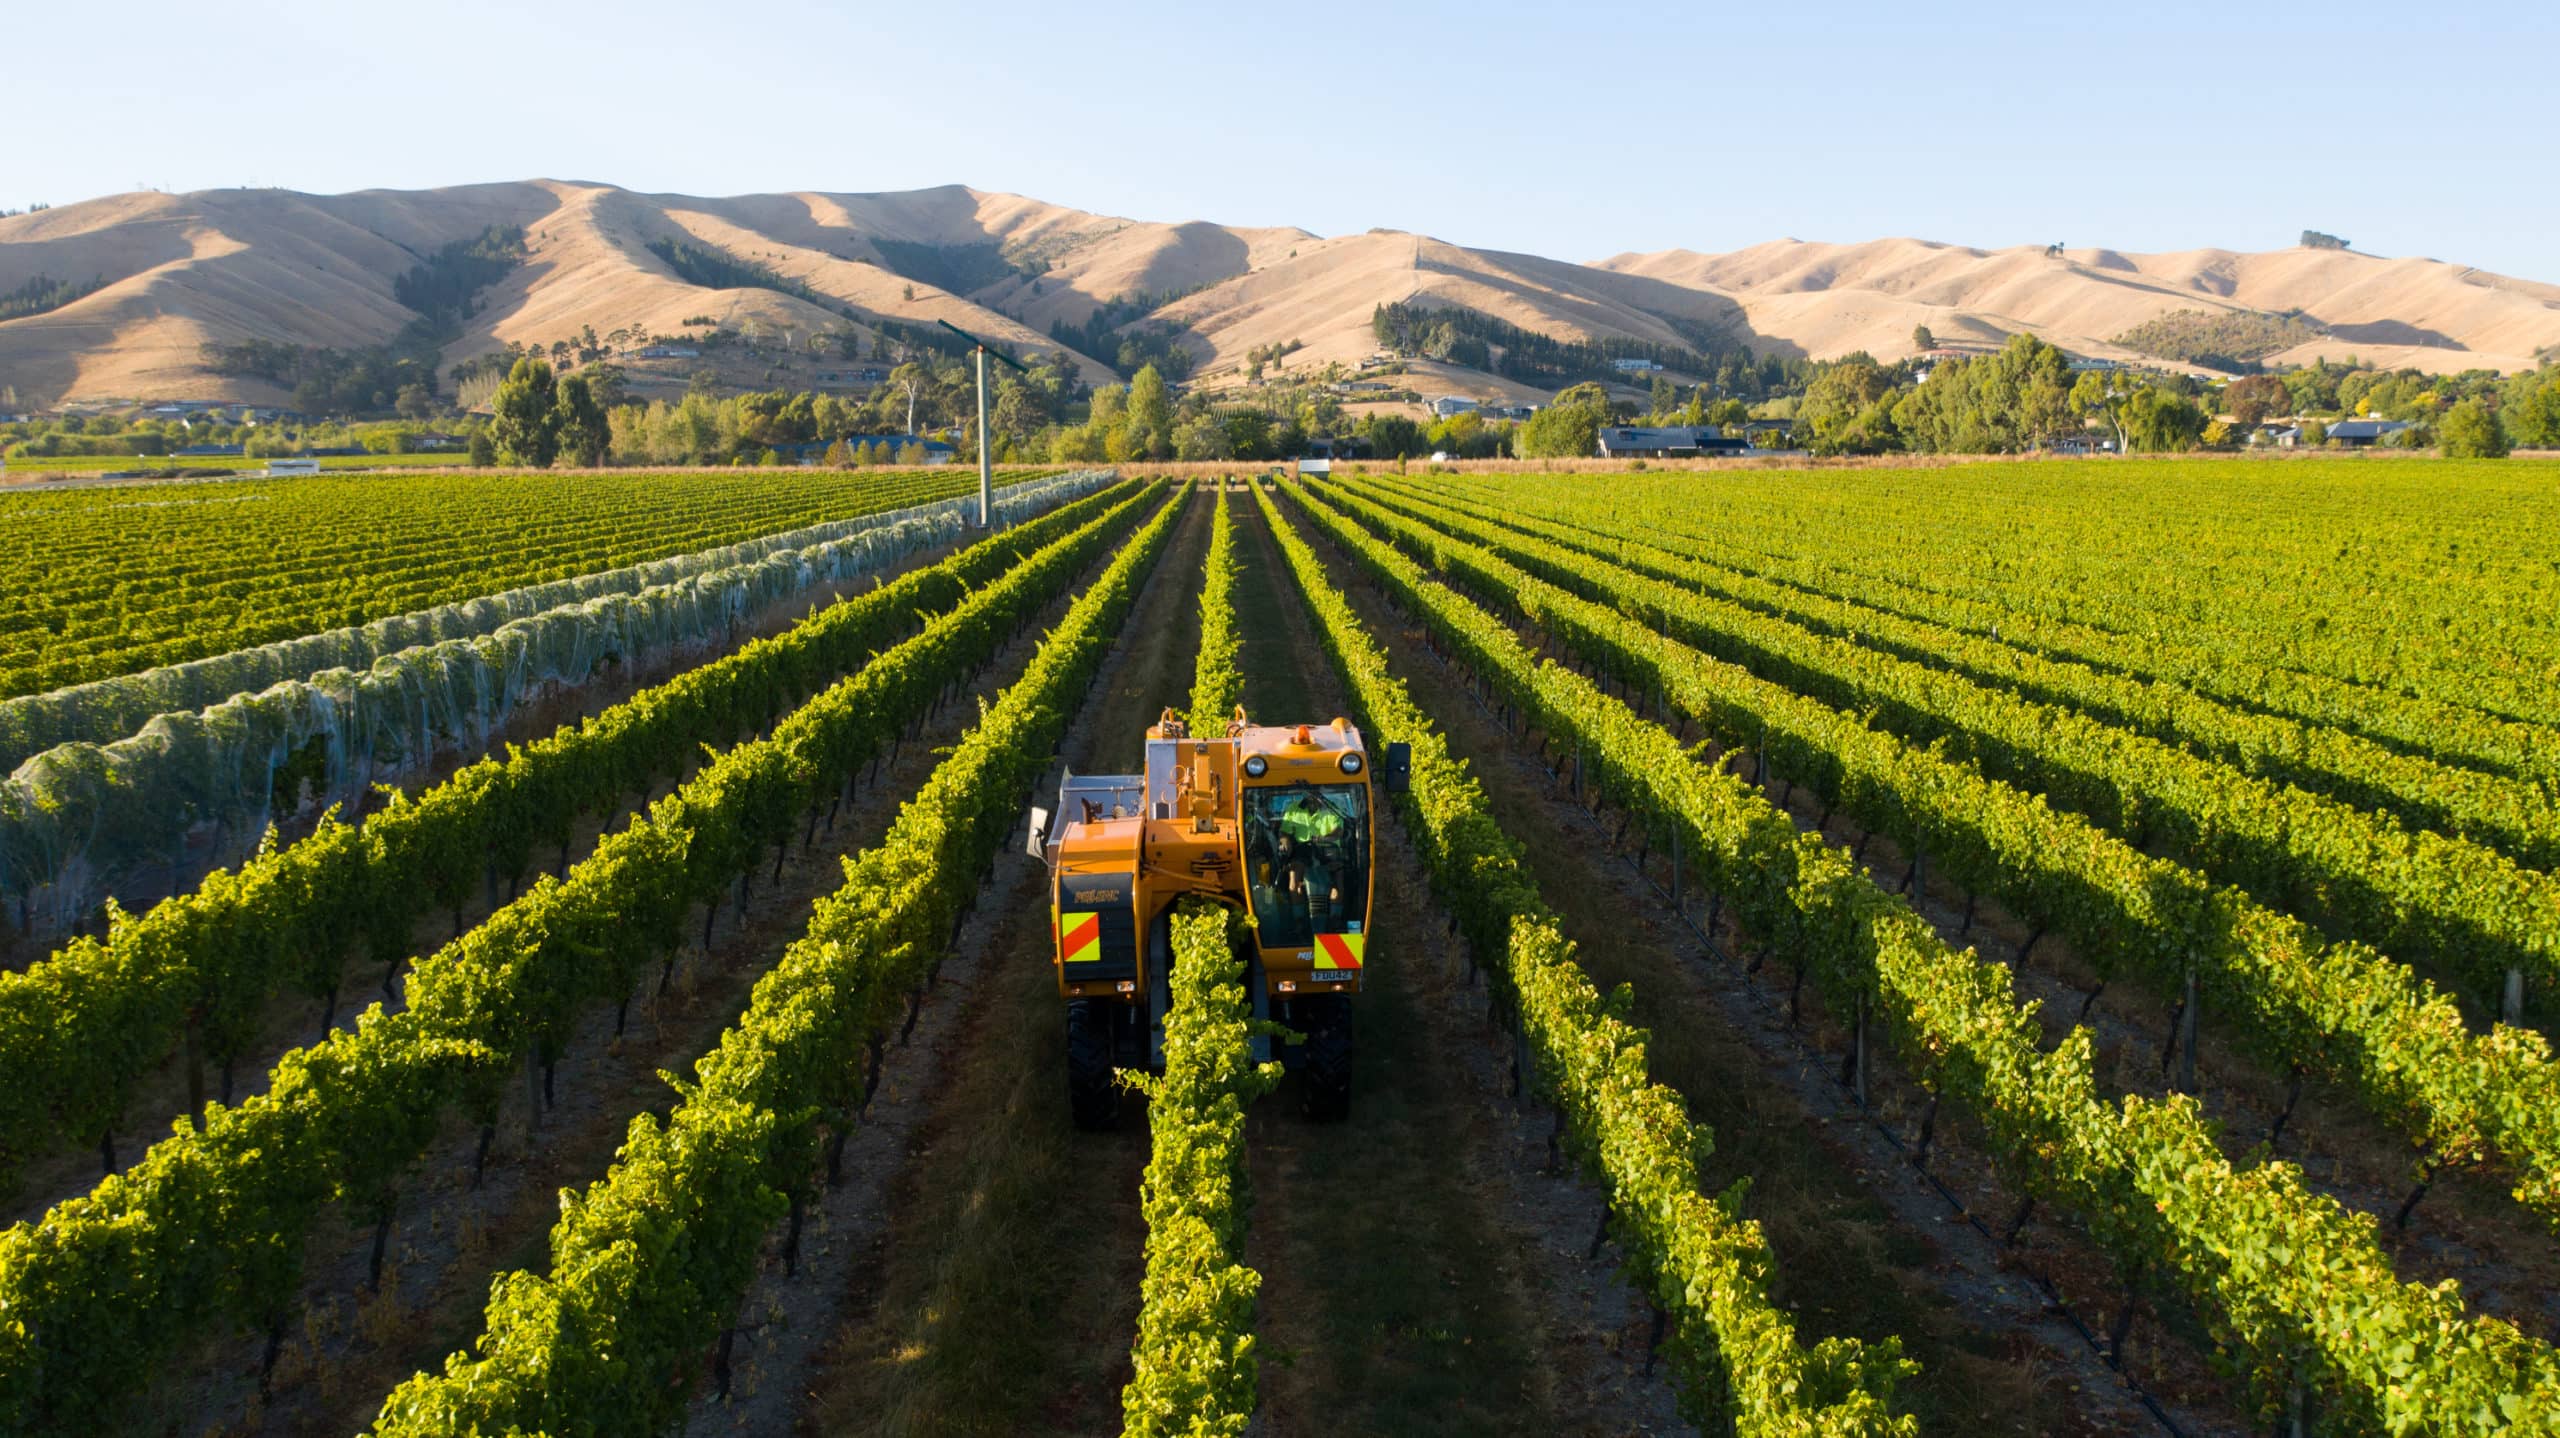 Next Generation Viticulture – developing the next generation of New Zealand wine production systems